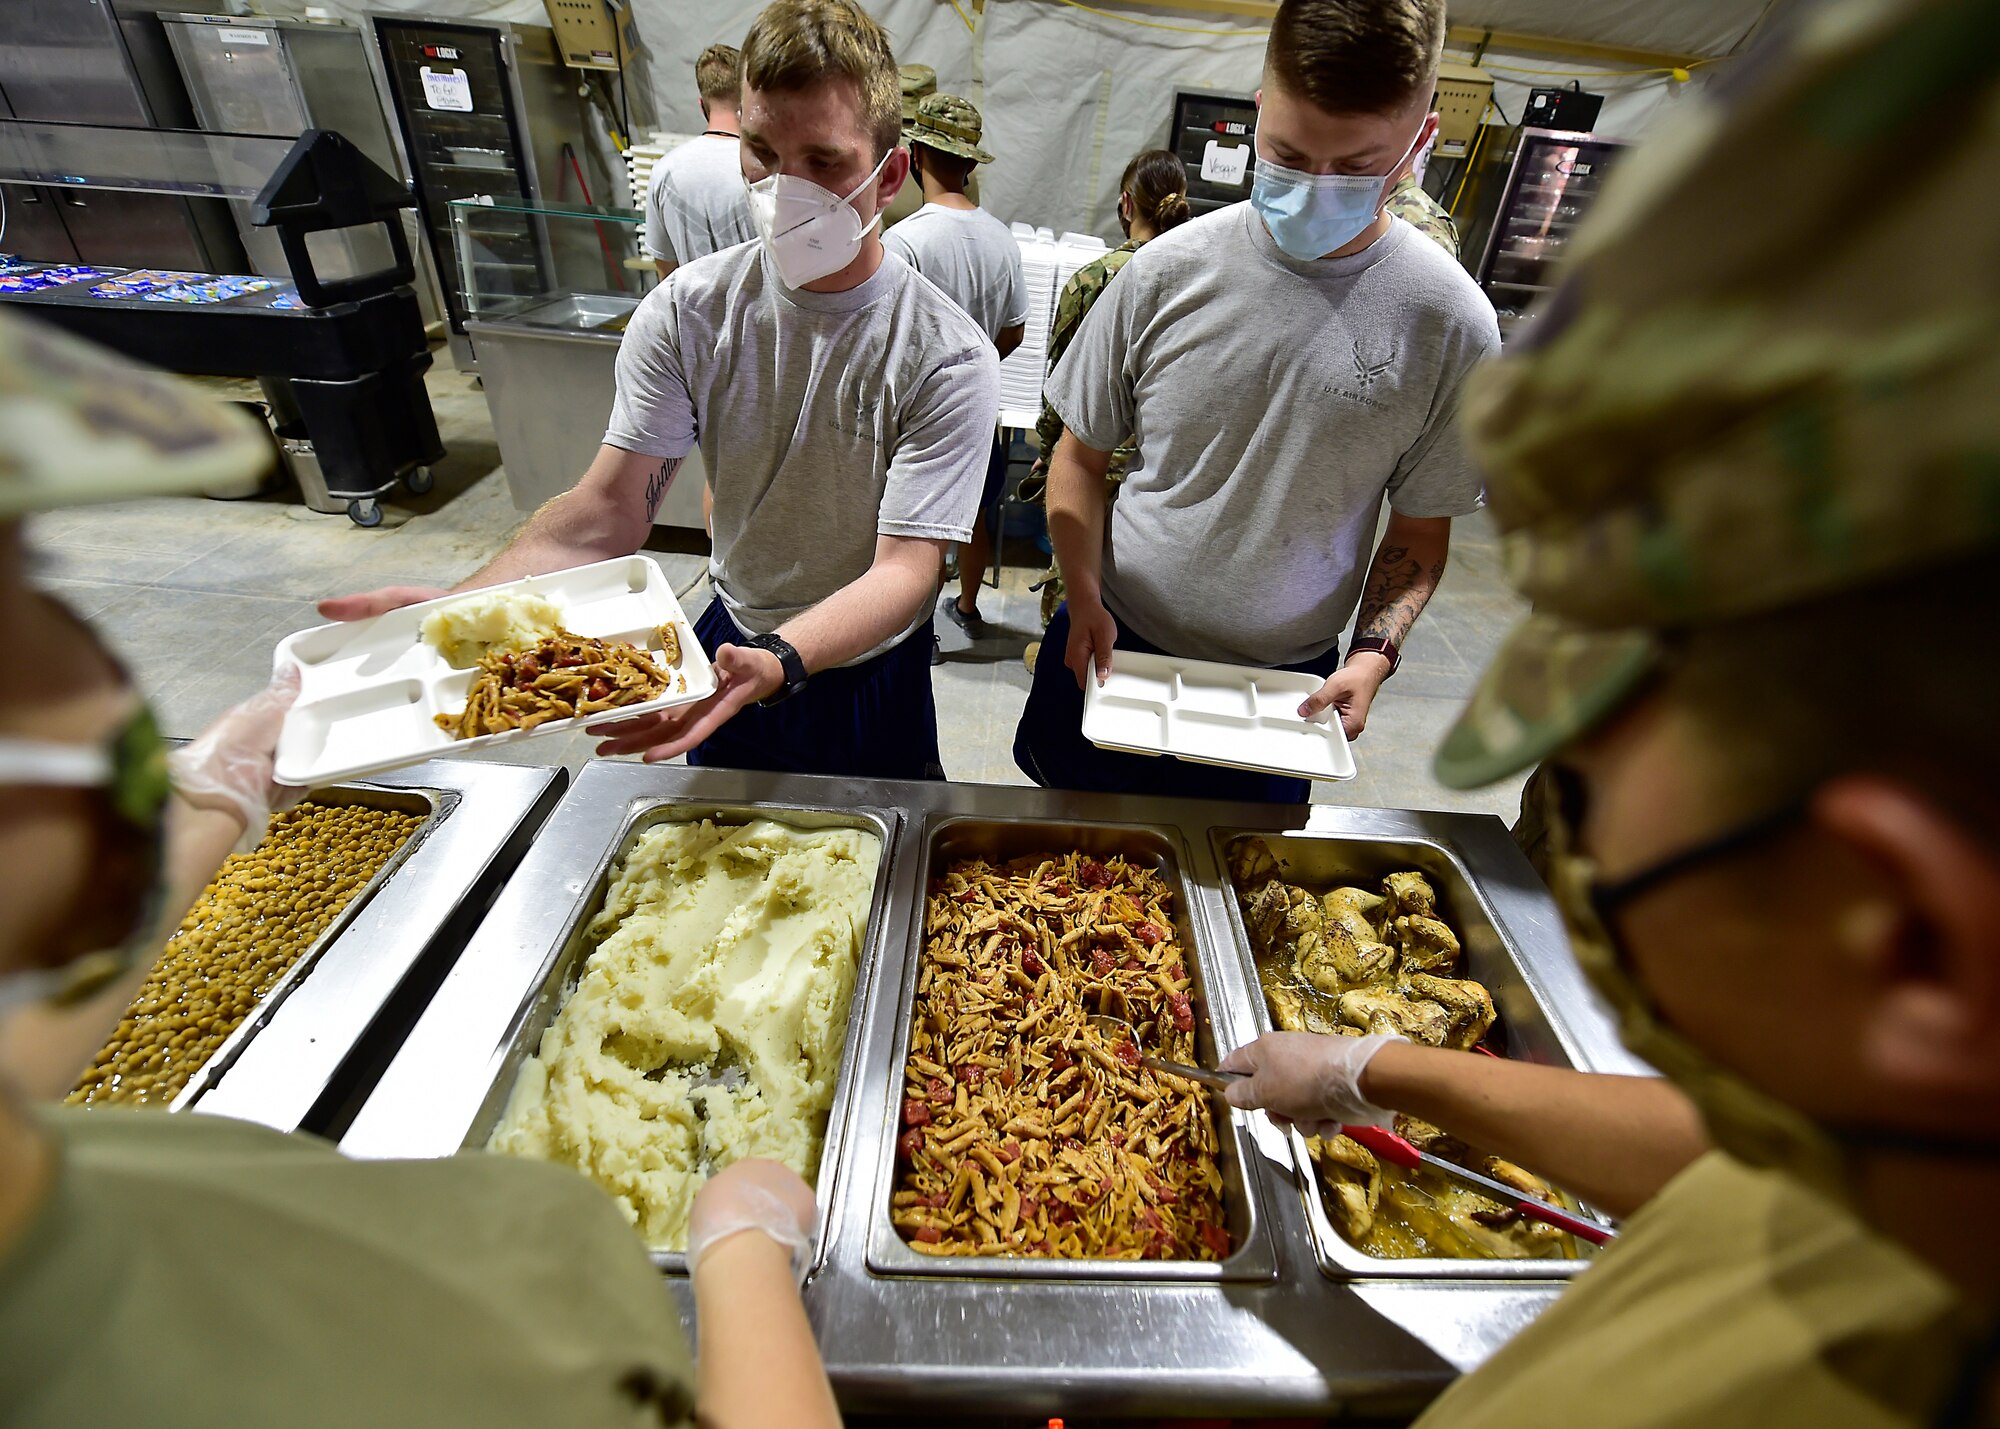 Airmen from the 378th Expeditionary Force Support Squadron services section prepare and serve lunch to base personnel.